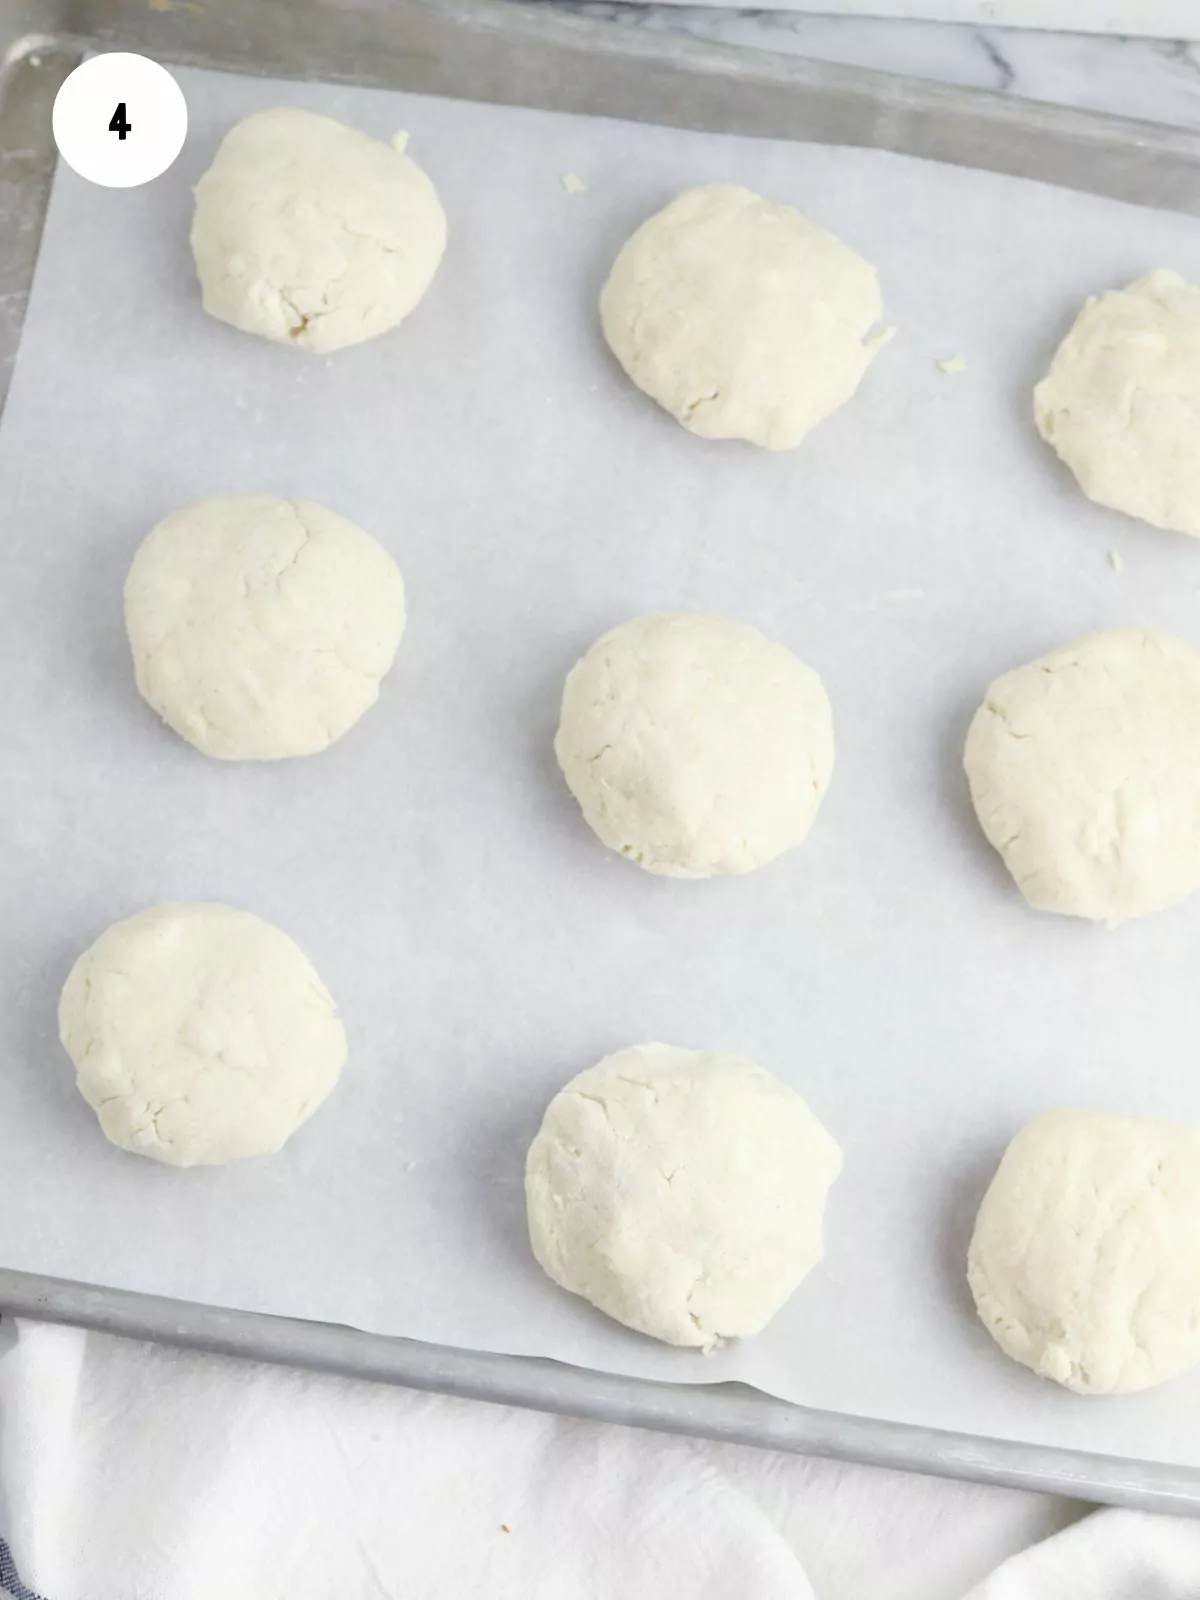 Balls of dough on a baking sheet lined with parchment paper